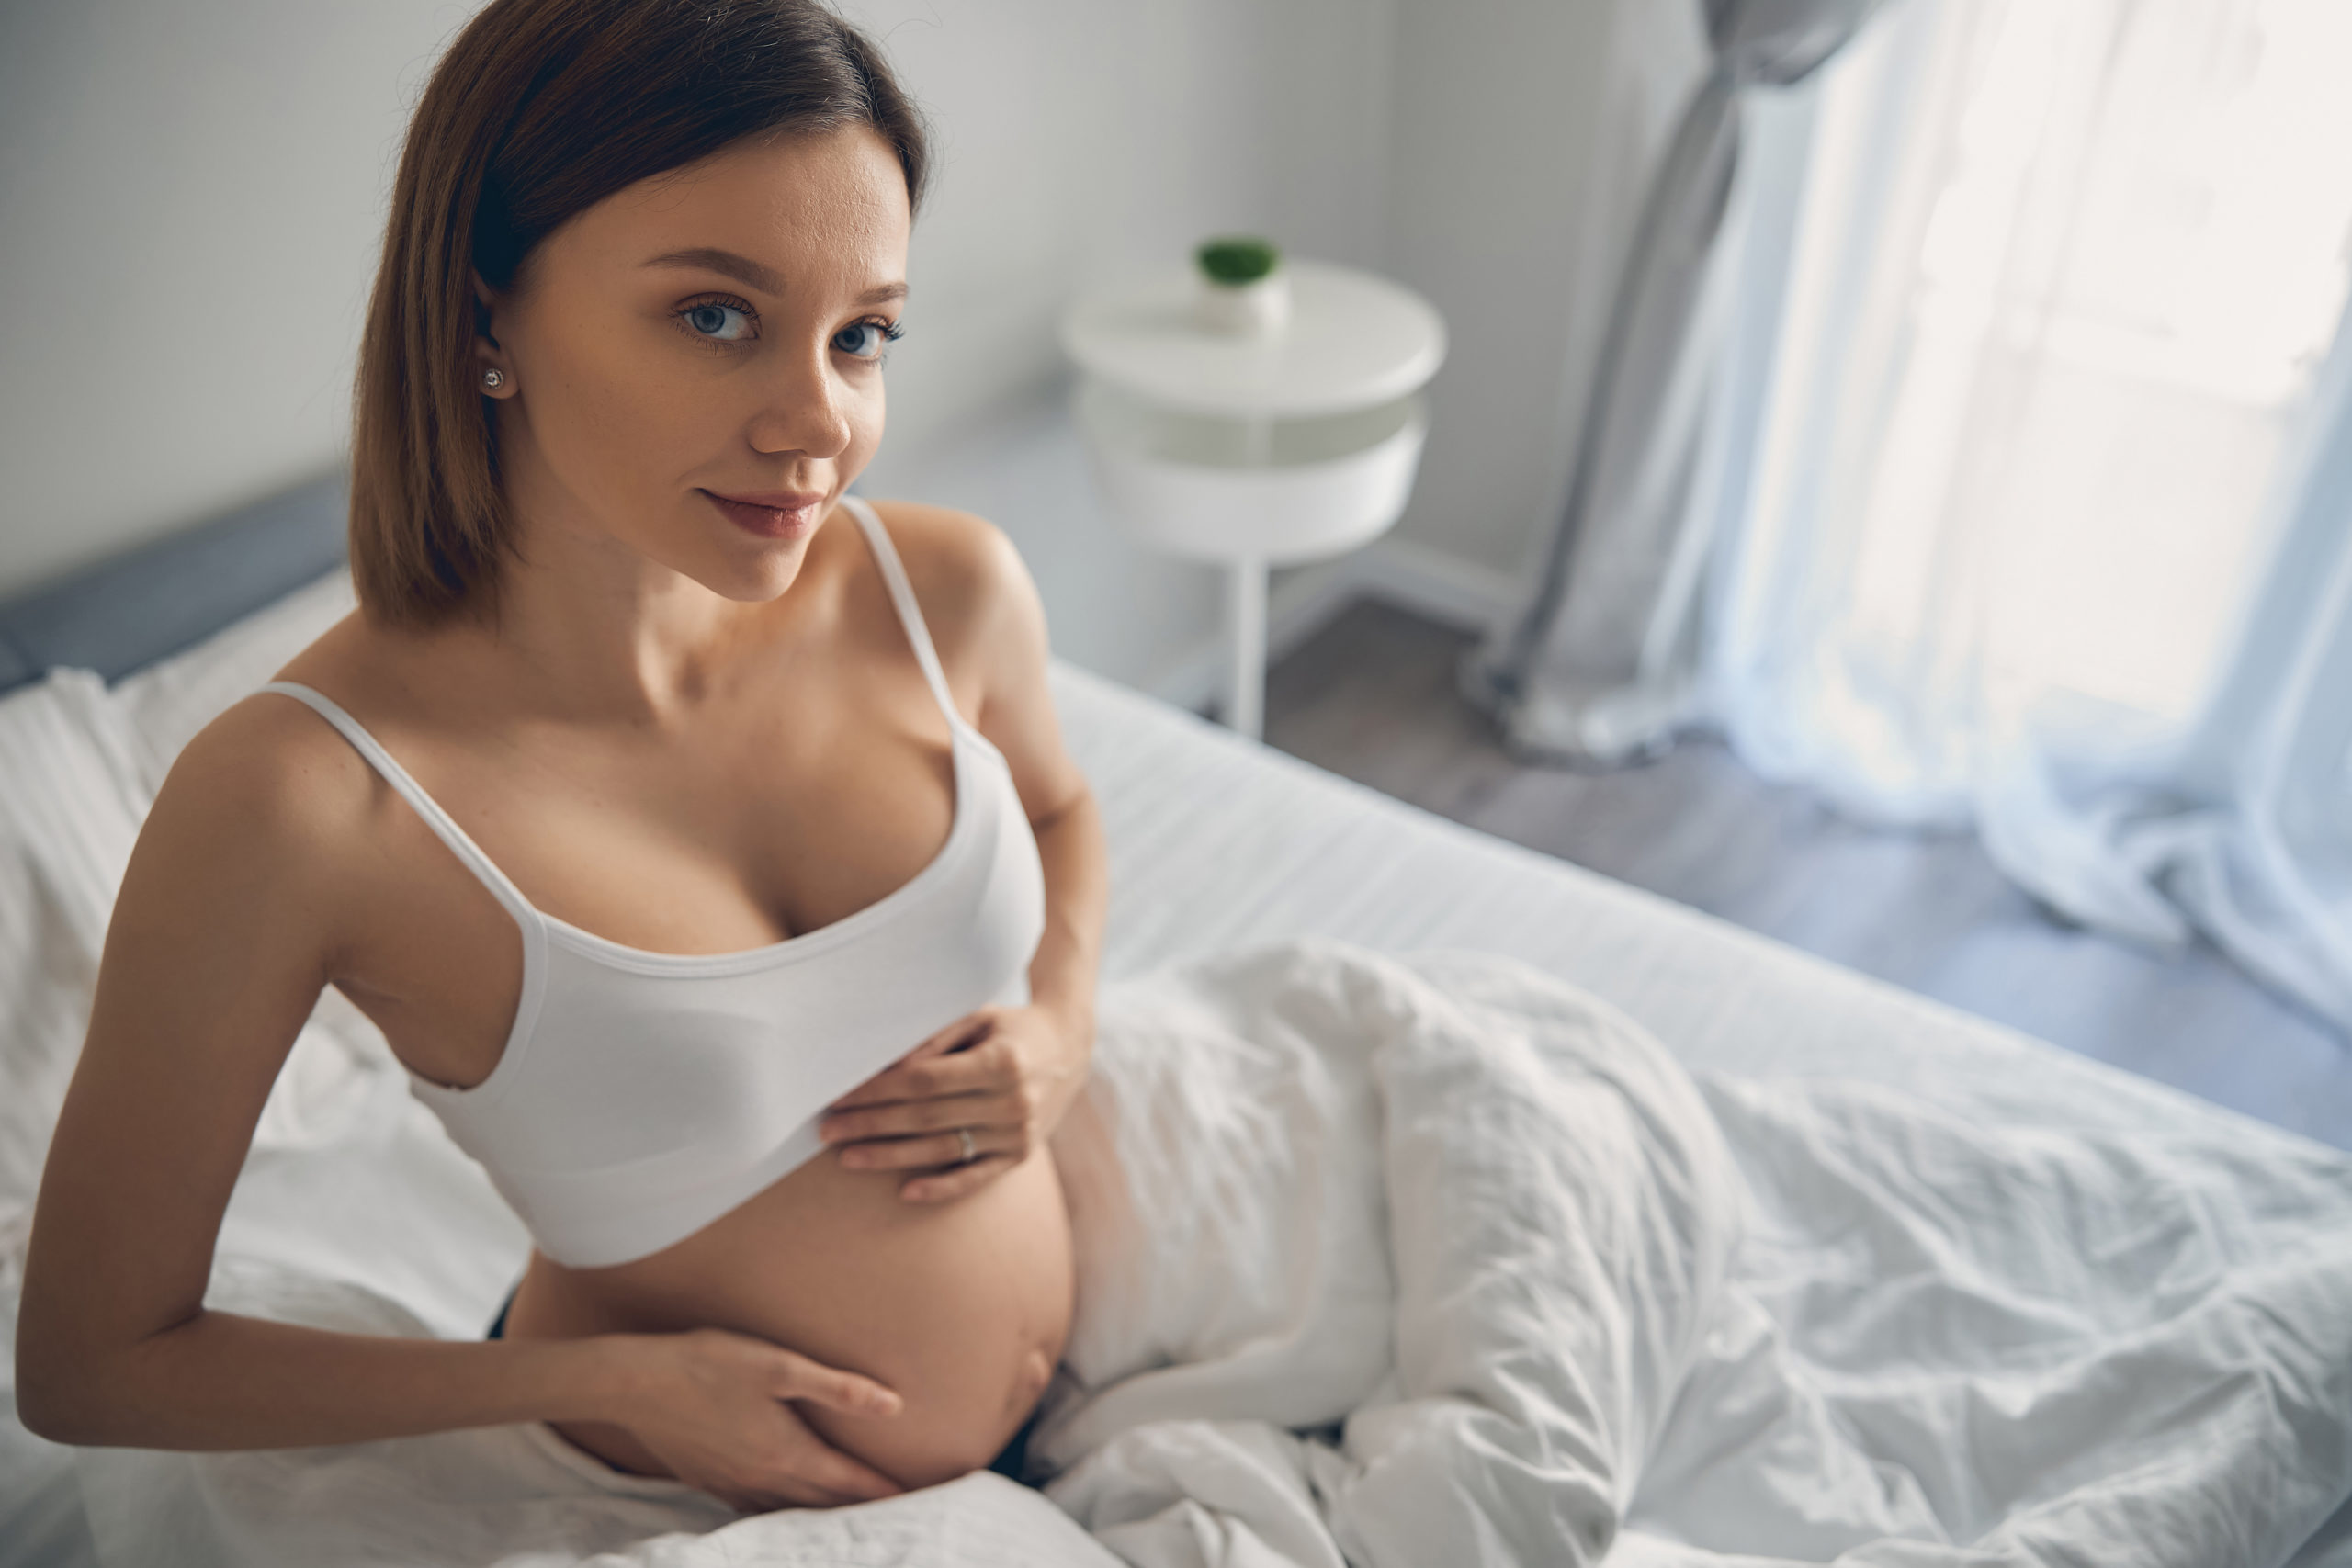 Pregnancy Breast Growth: The Best Maternity Bra for Each Trimester